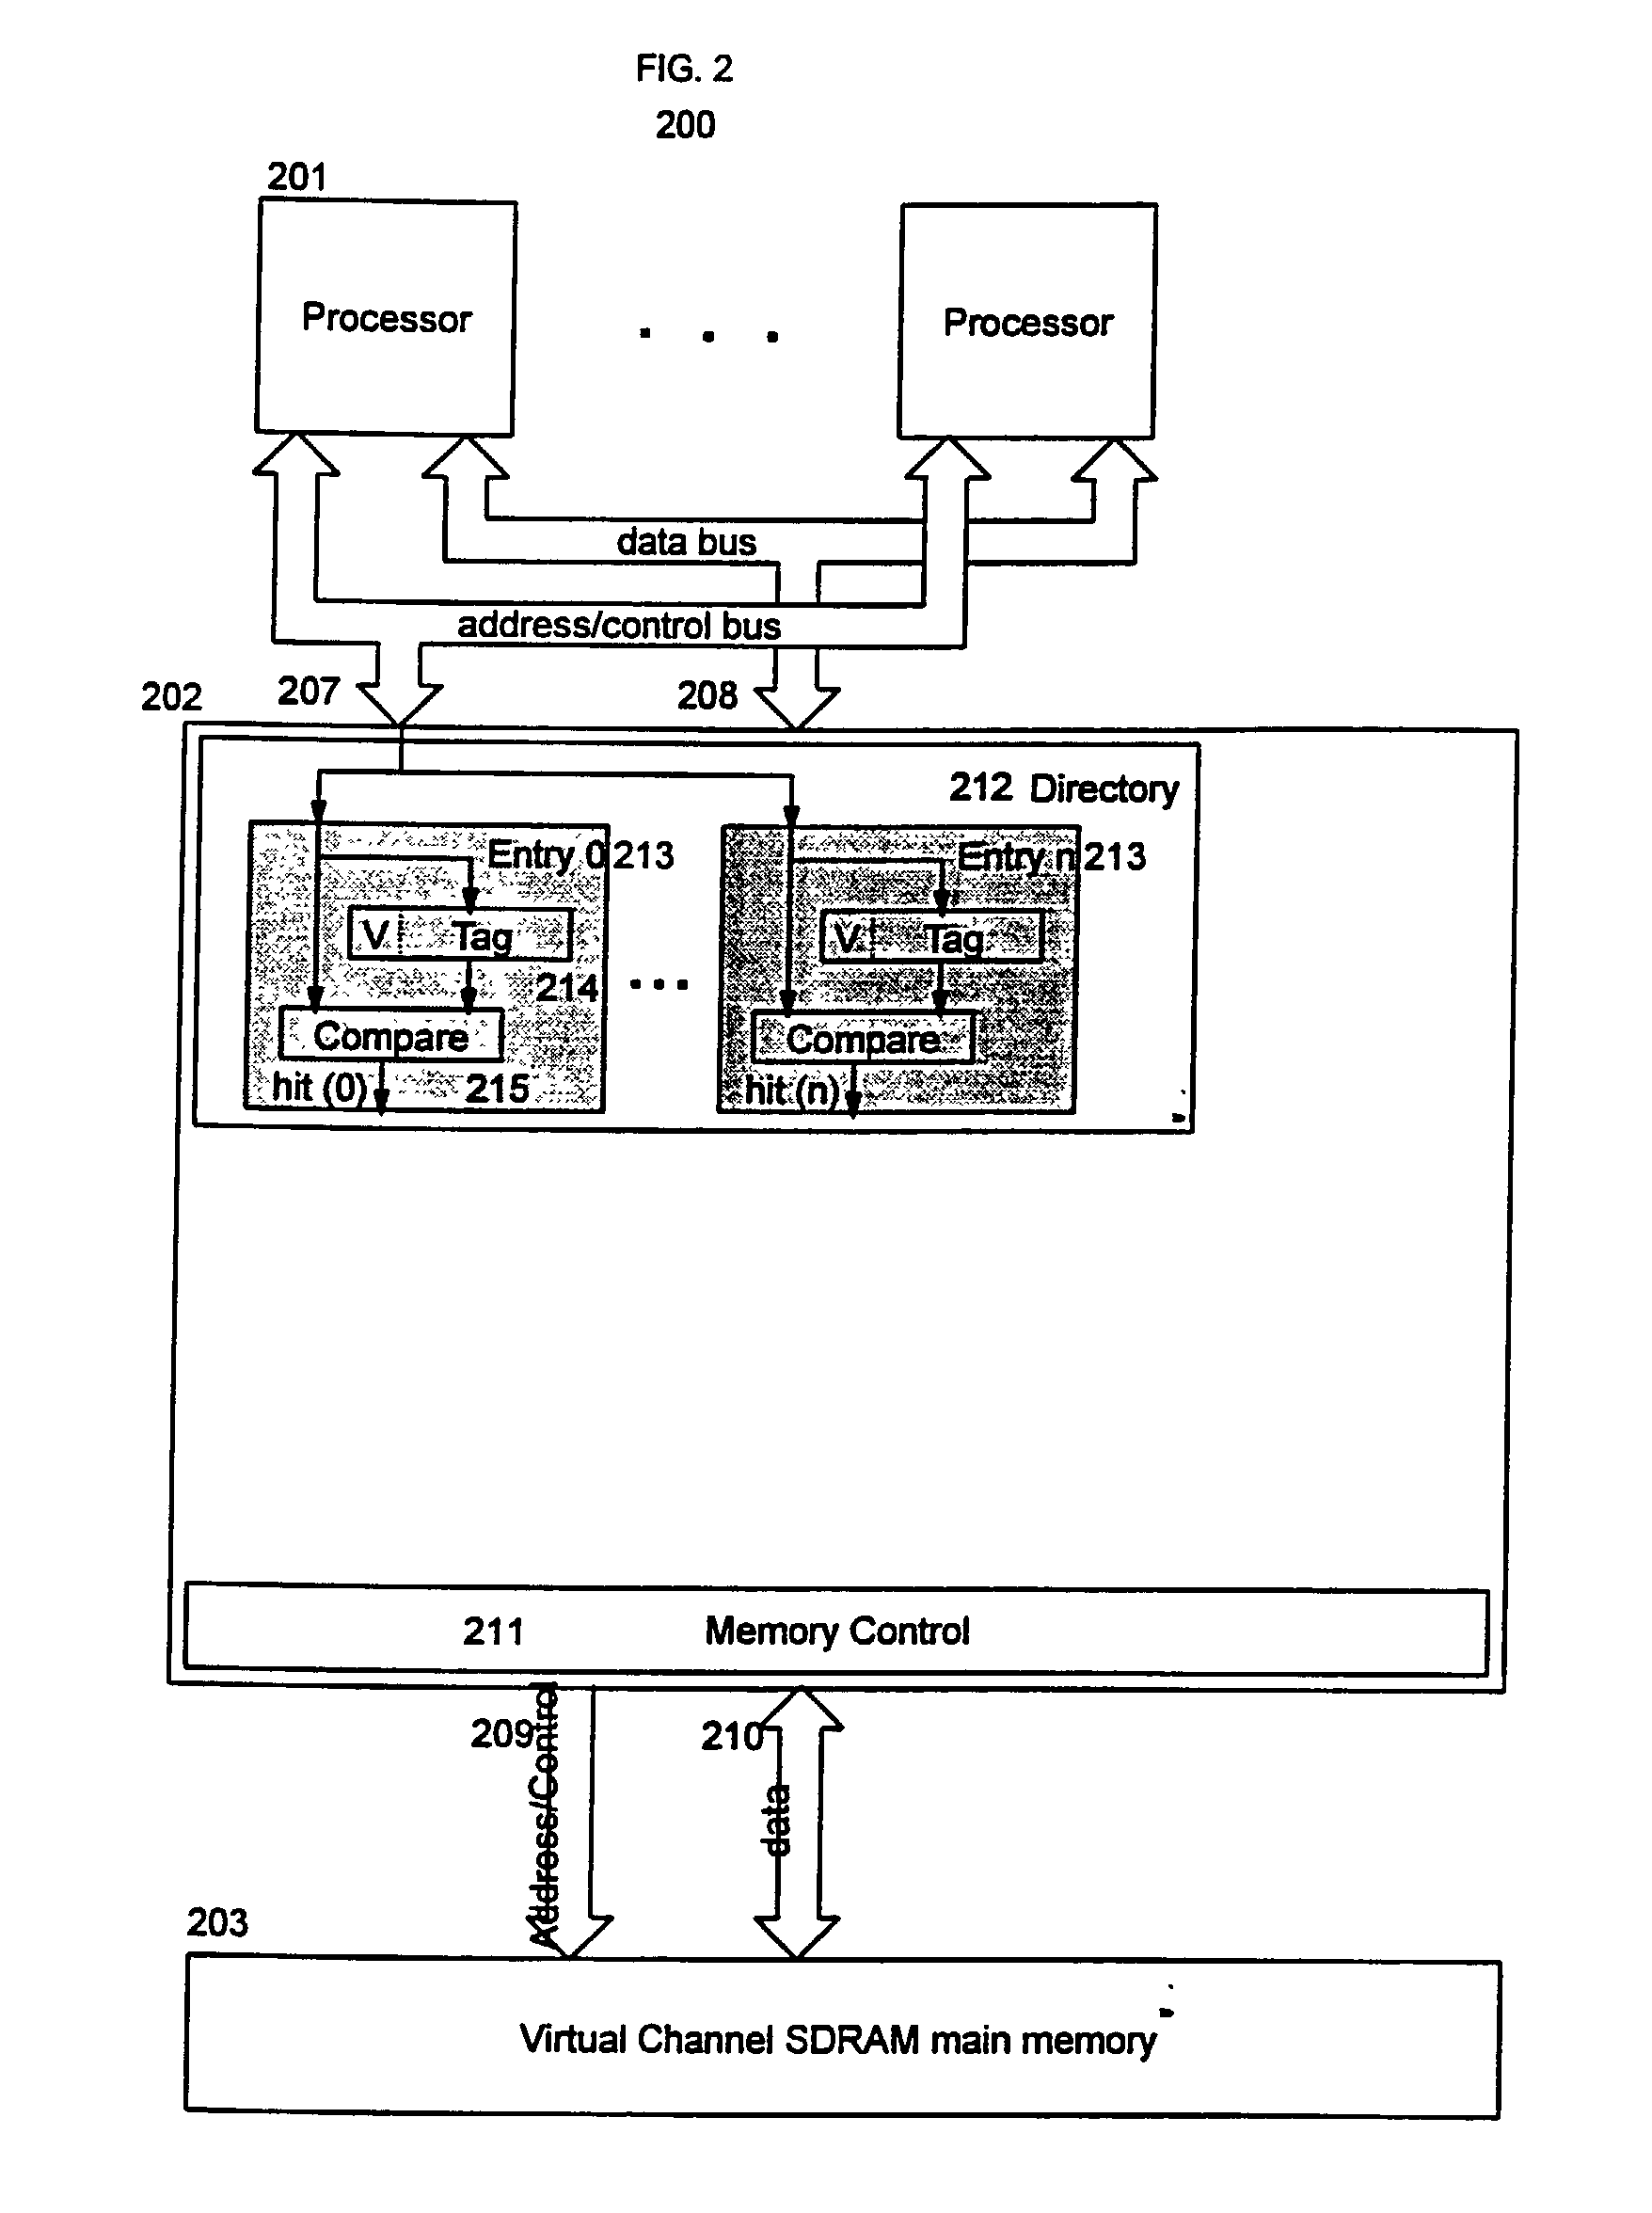 System and method for dynamically allocating associative resources